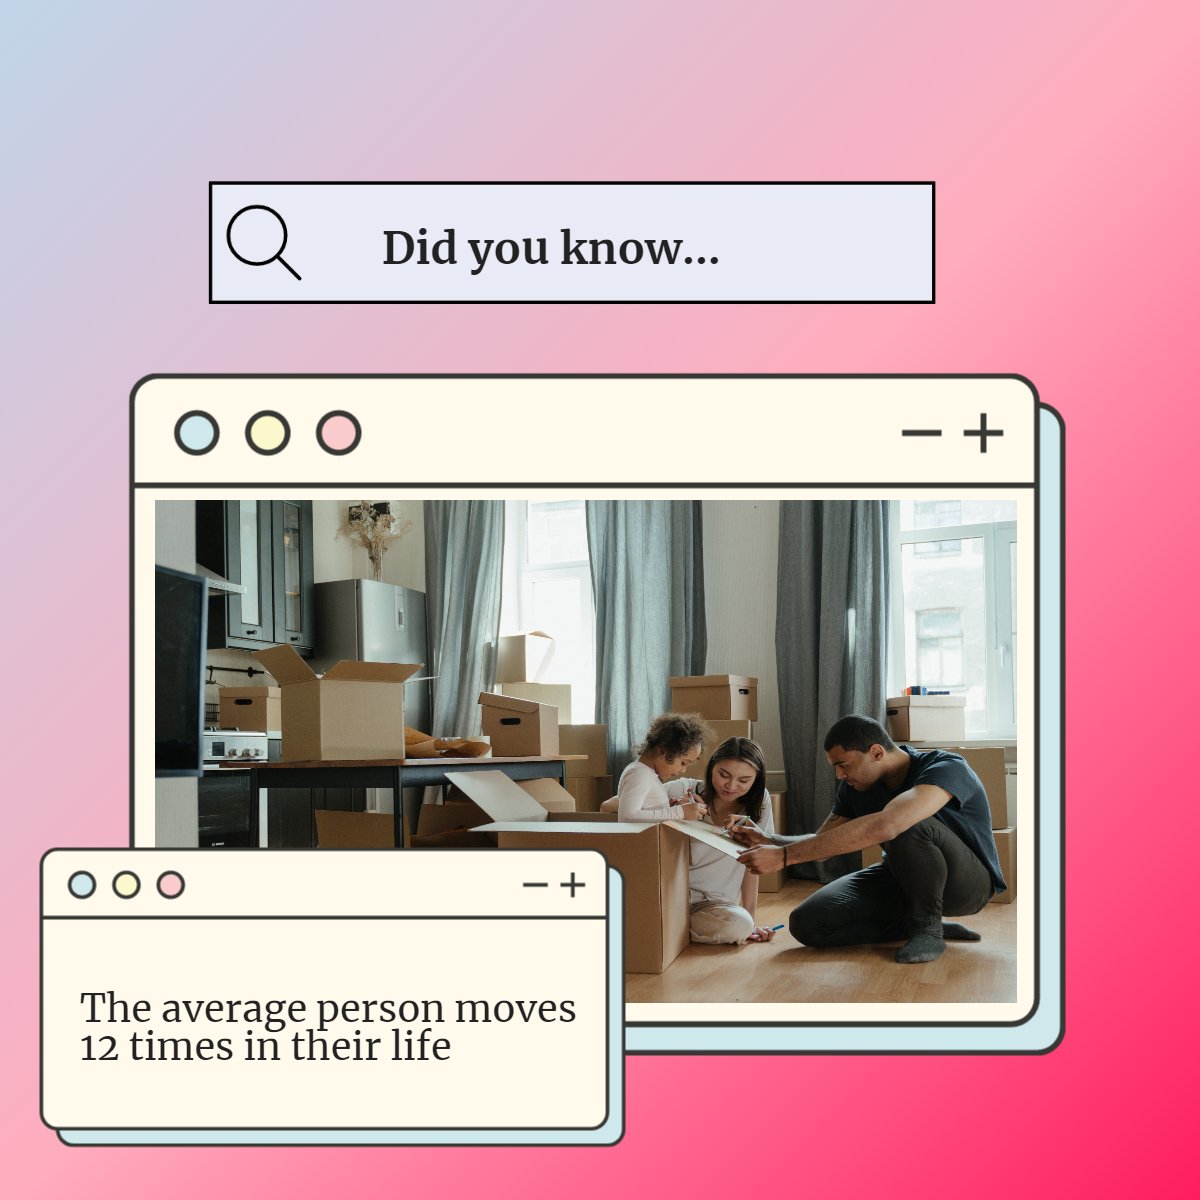 How many times have you moved in your life? 🤔

Comment below!

#didyouknow #didyouknowfacts #manhattan #factoftheday #realestatefact #moving
 #realestate #buy #purchase #firsttimehomebuyer #fha #chase #zillow #rockland #bergen #westchester #listingagent #forsale